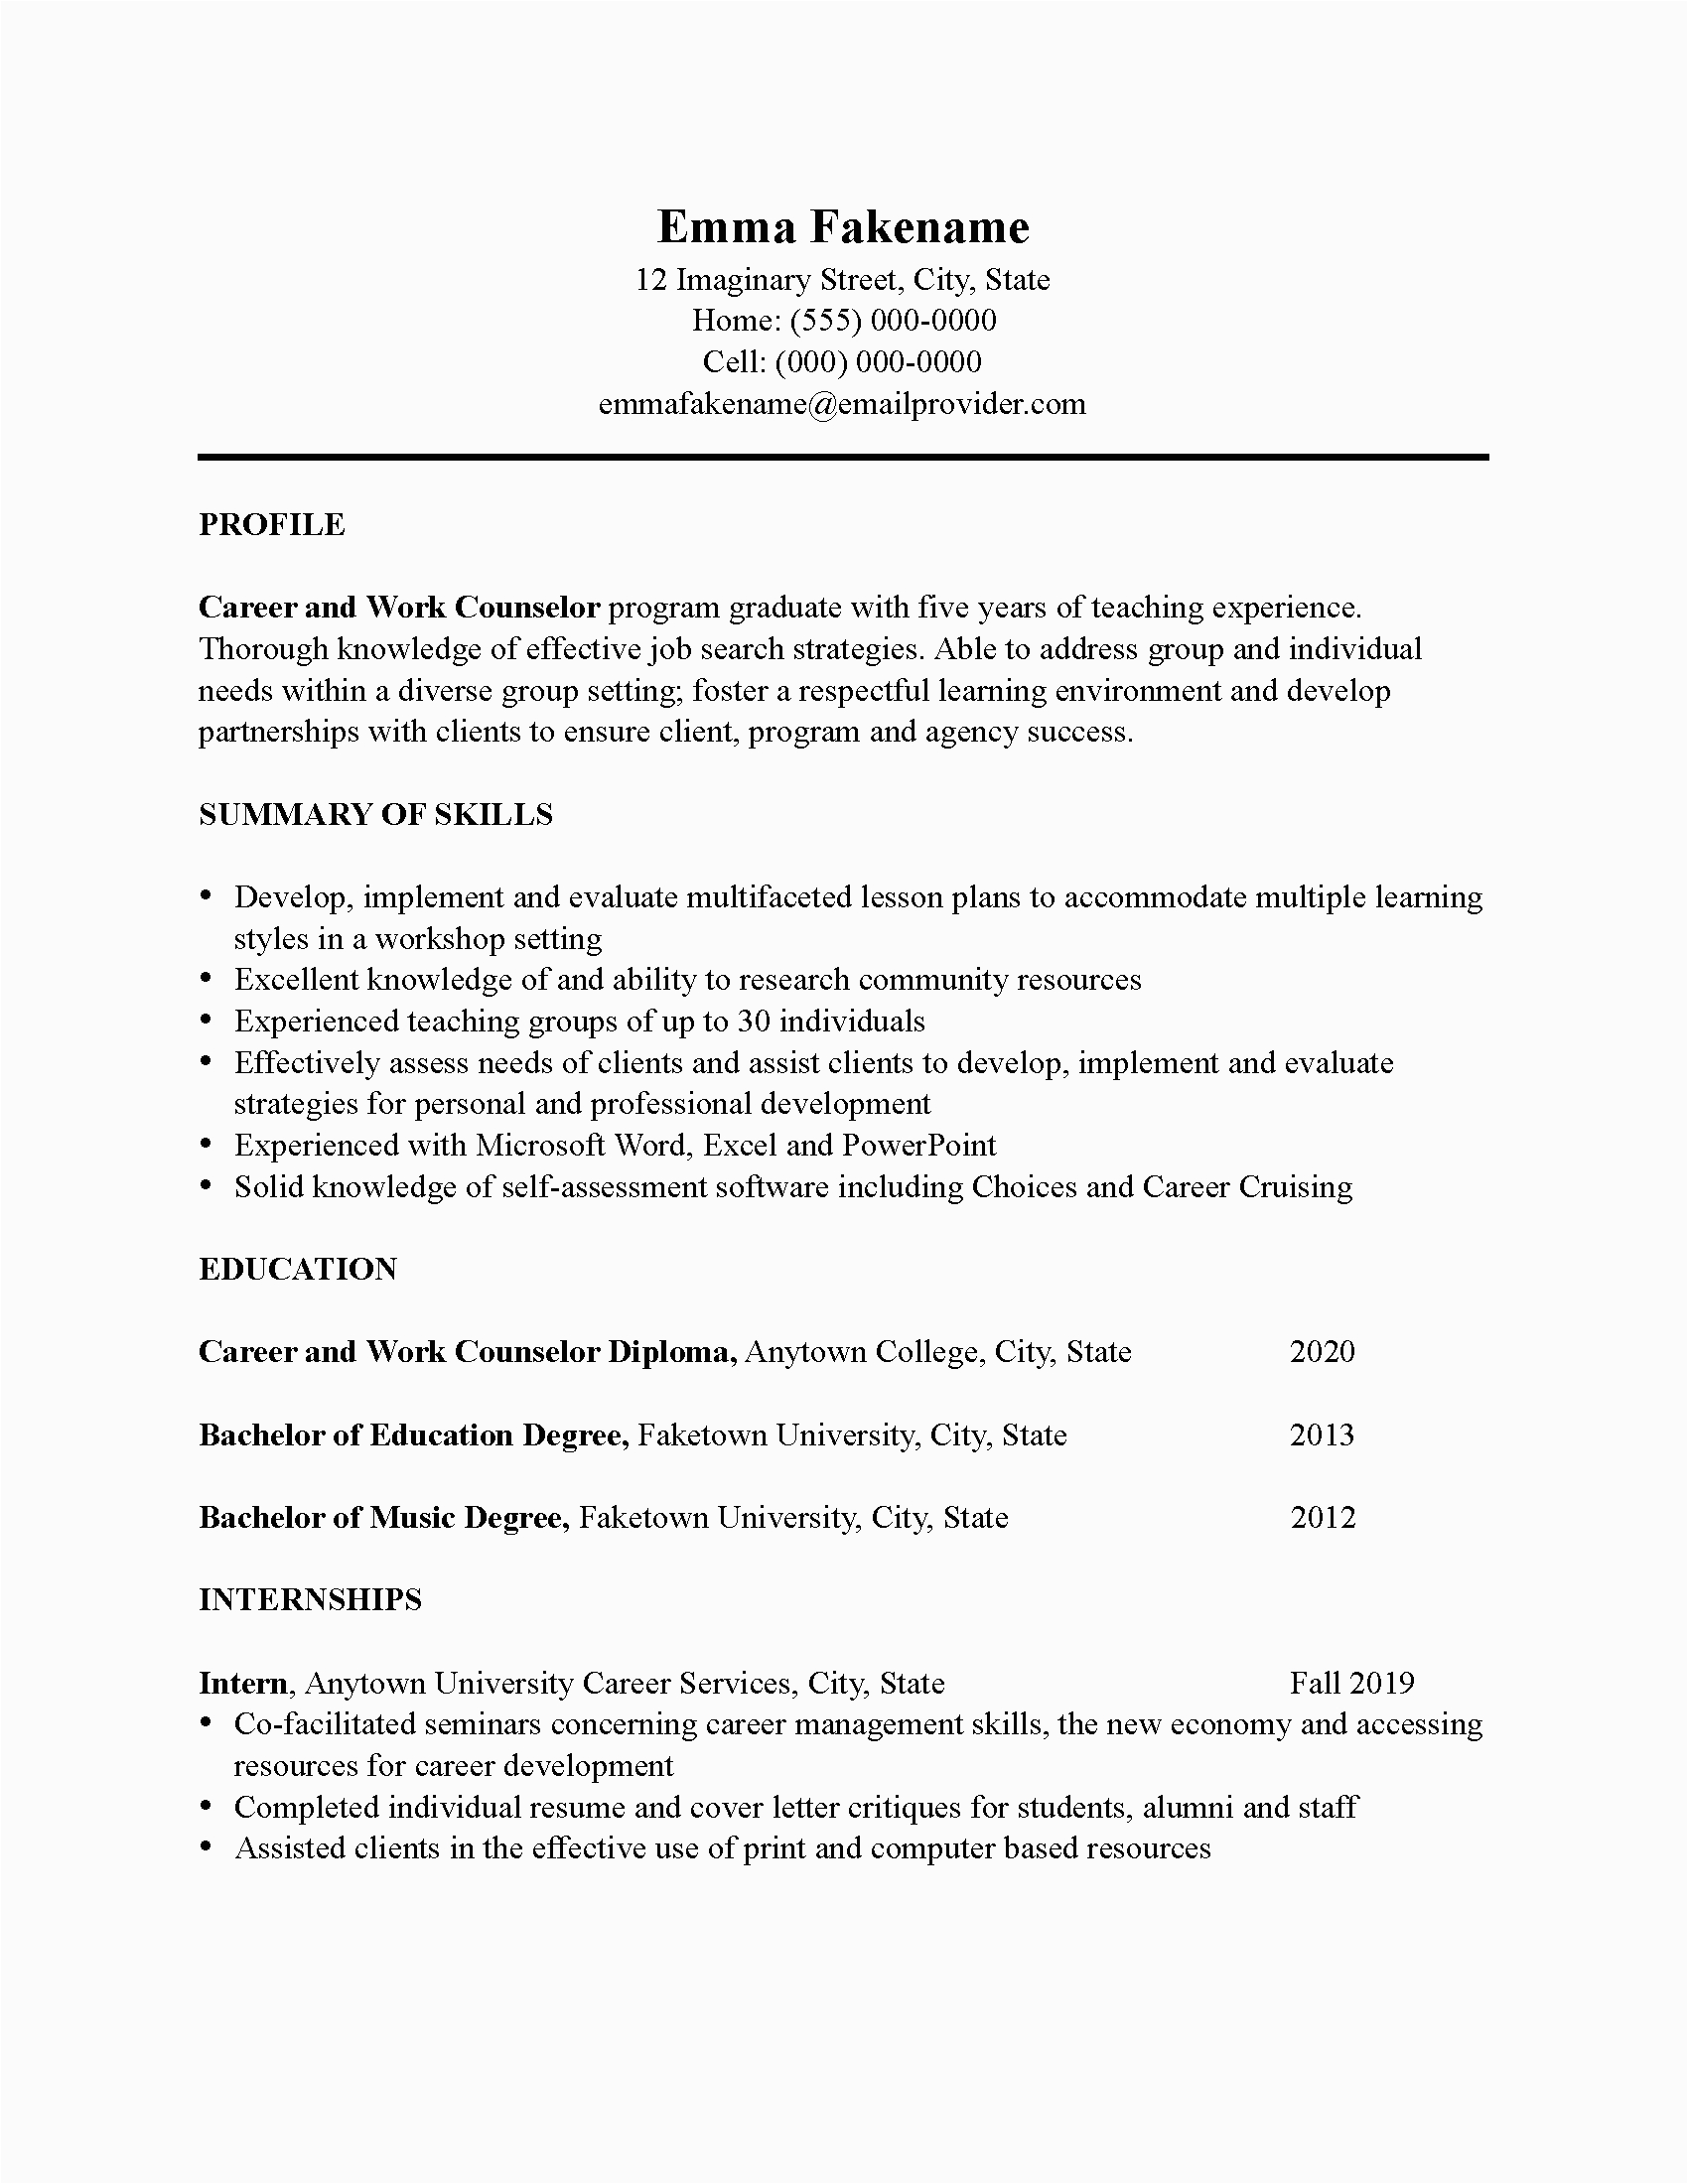 Sample Resume Objective Statements for Career Change Career Change Resume Sample In 2020